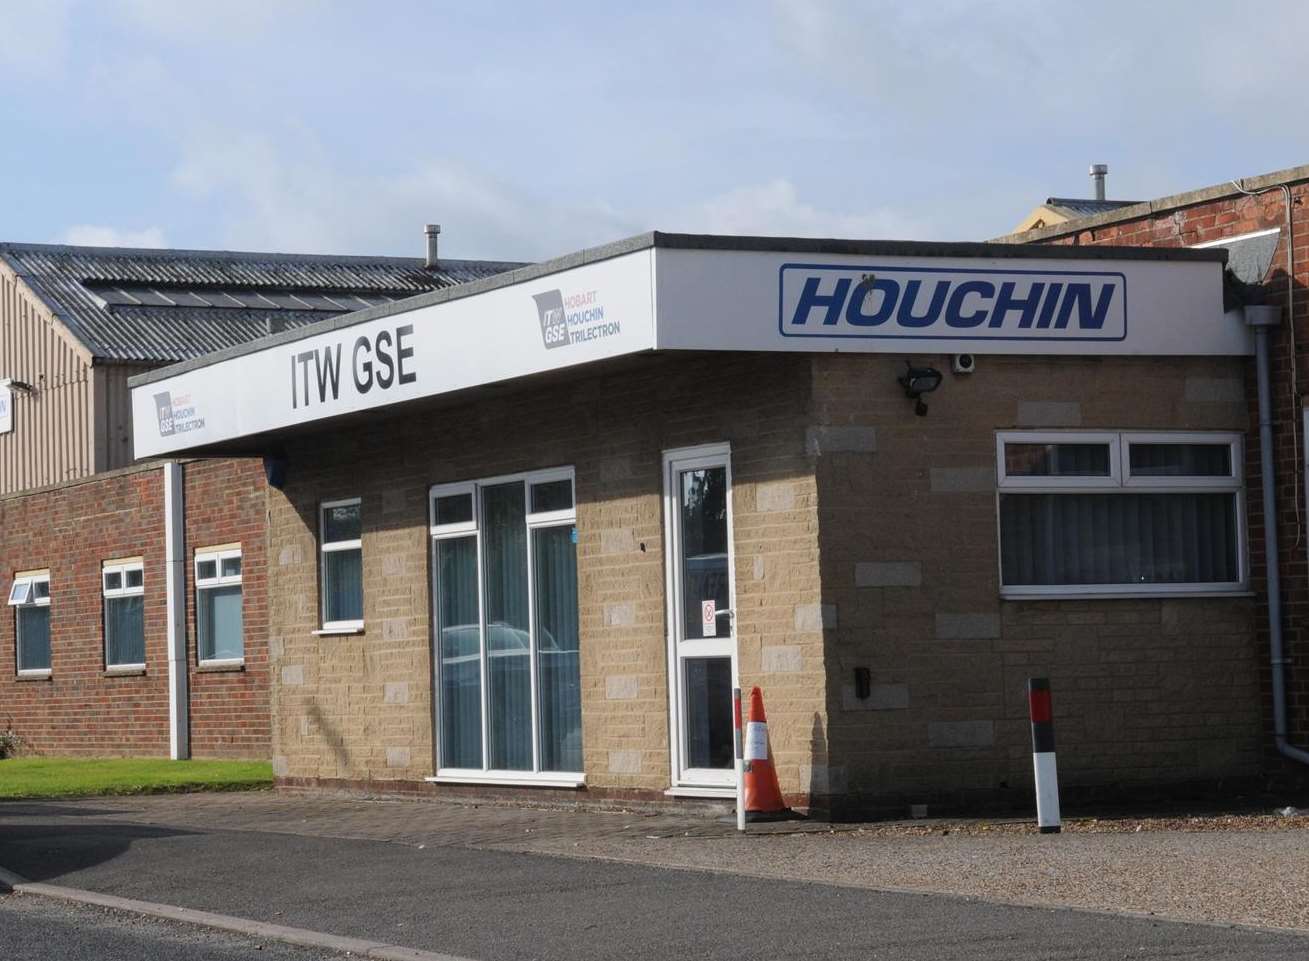 Jobs are at risk at Houchin